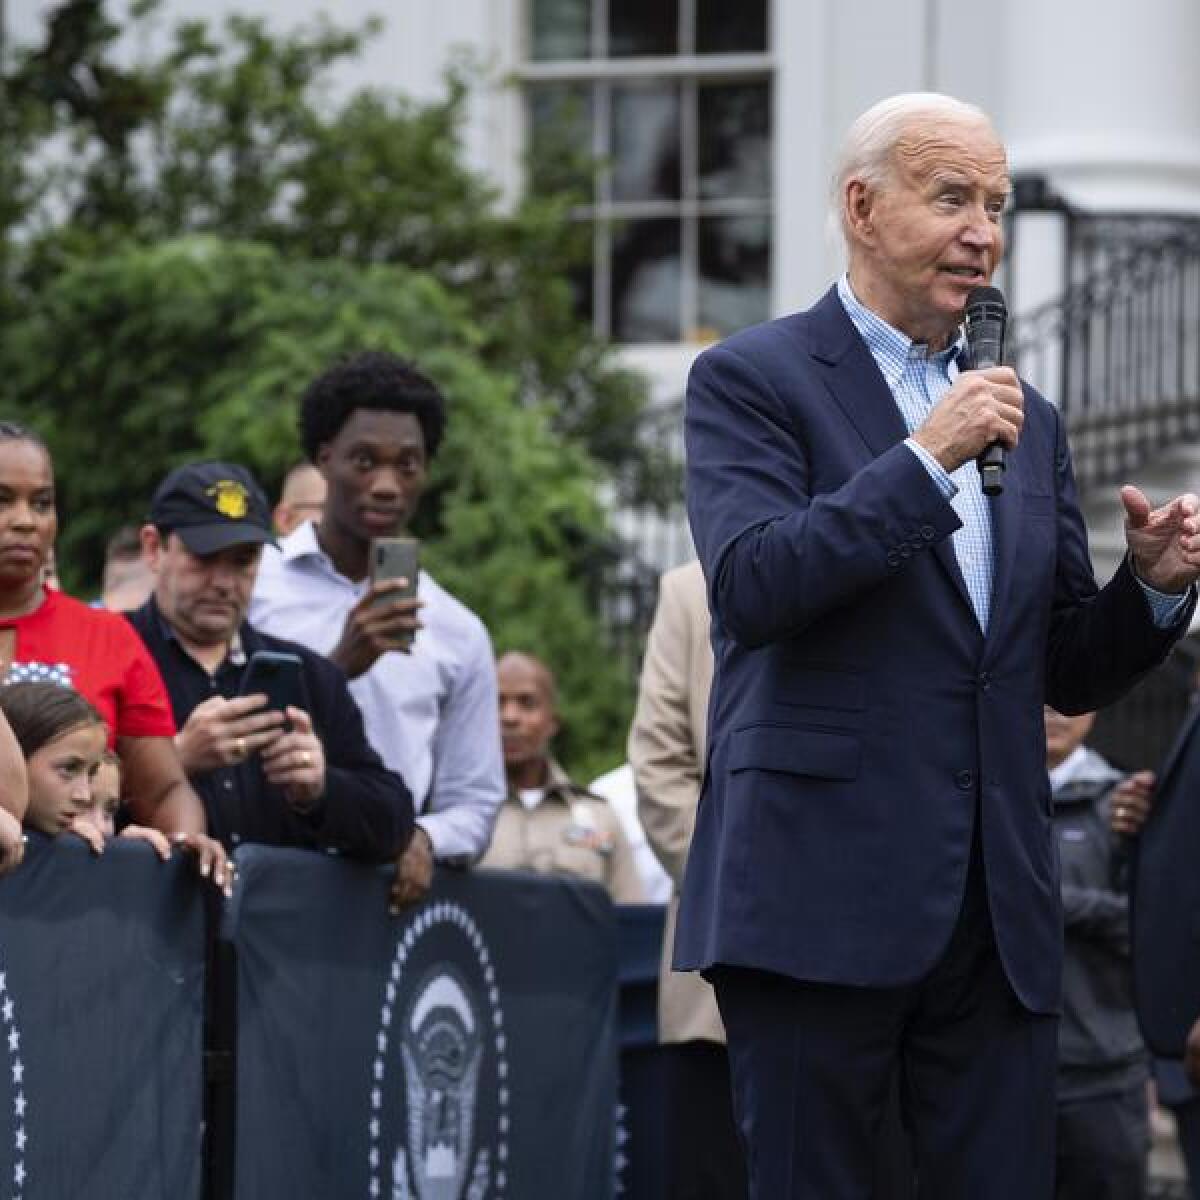 President Joe Biden at Fourth of July ceremonies at the White House